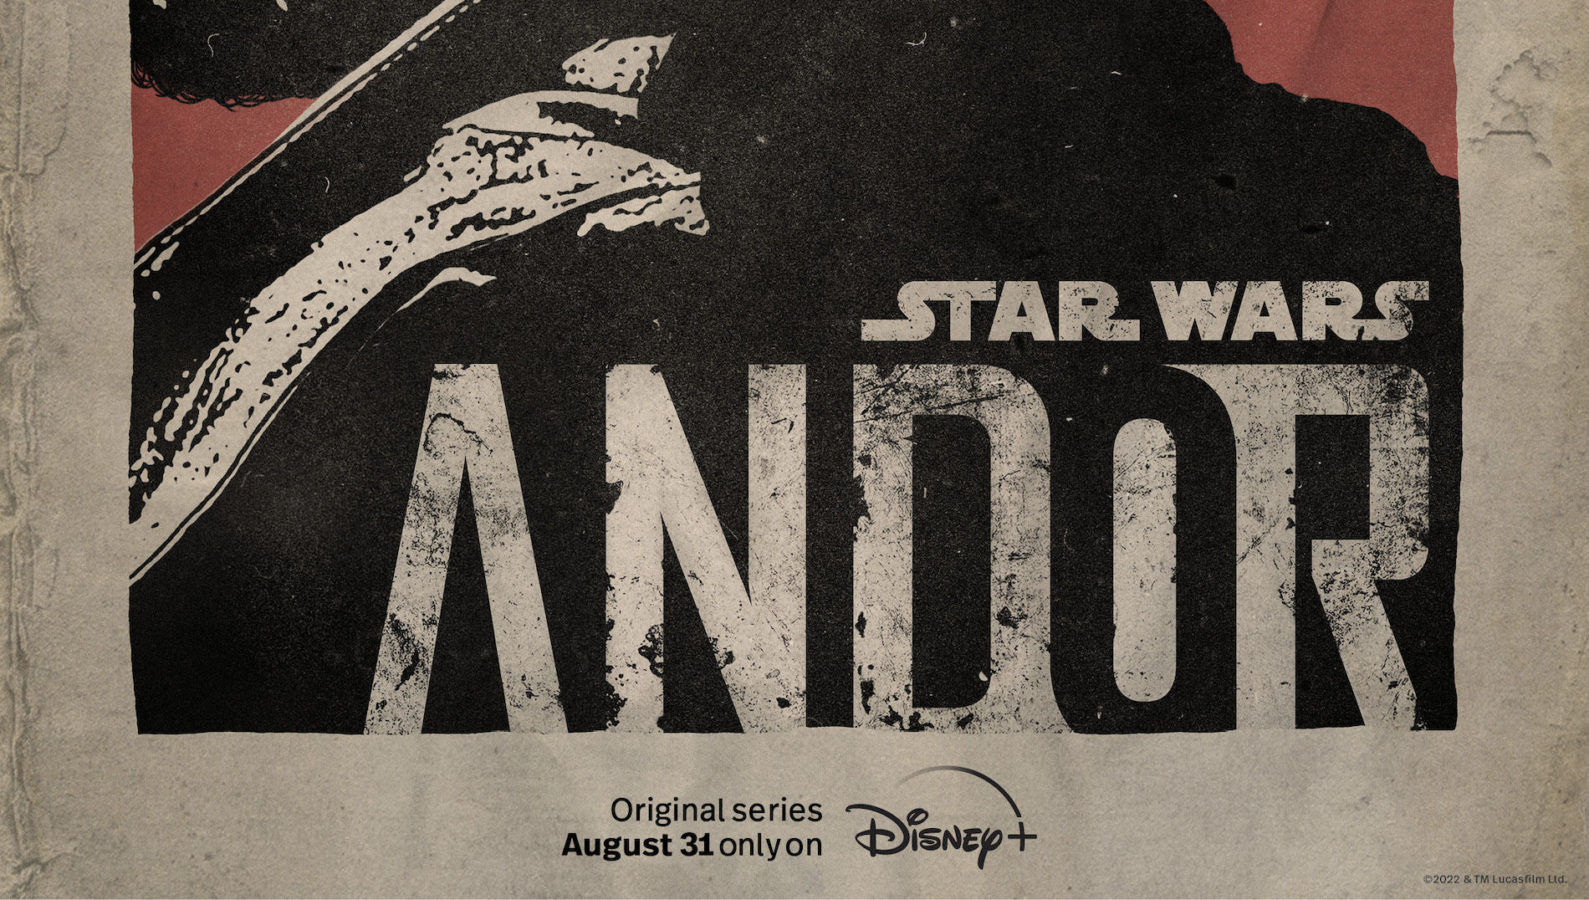 Poster Star Wars: Andor - For the Rebellion